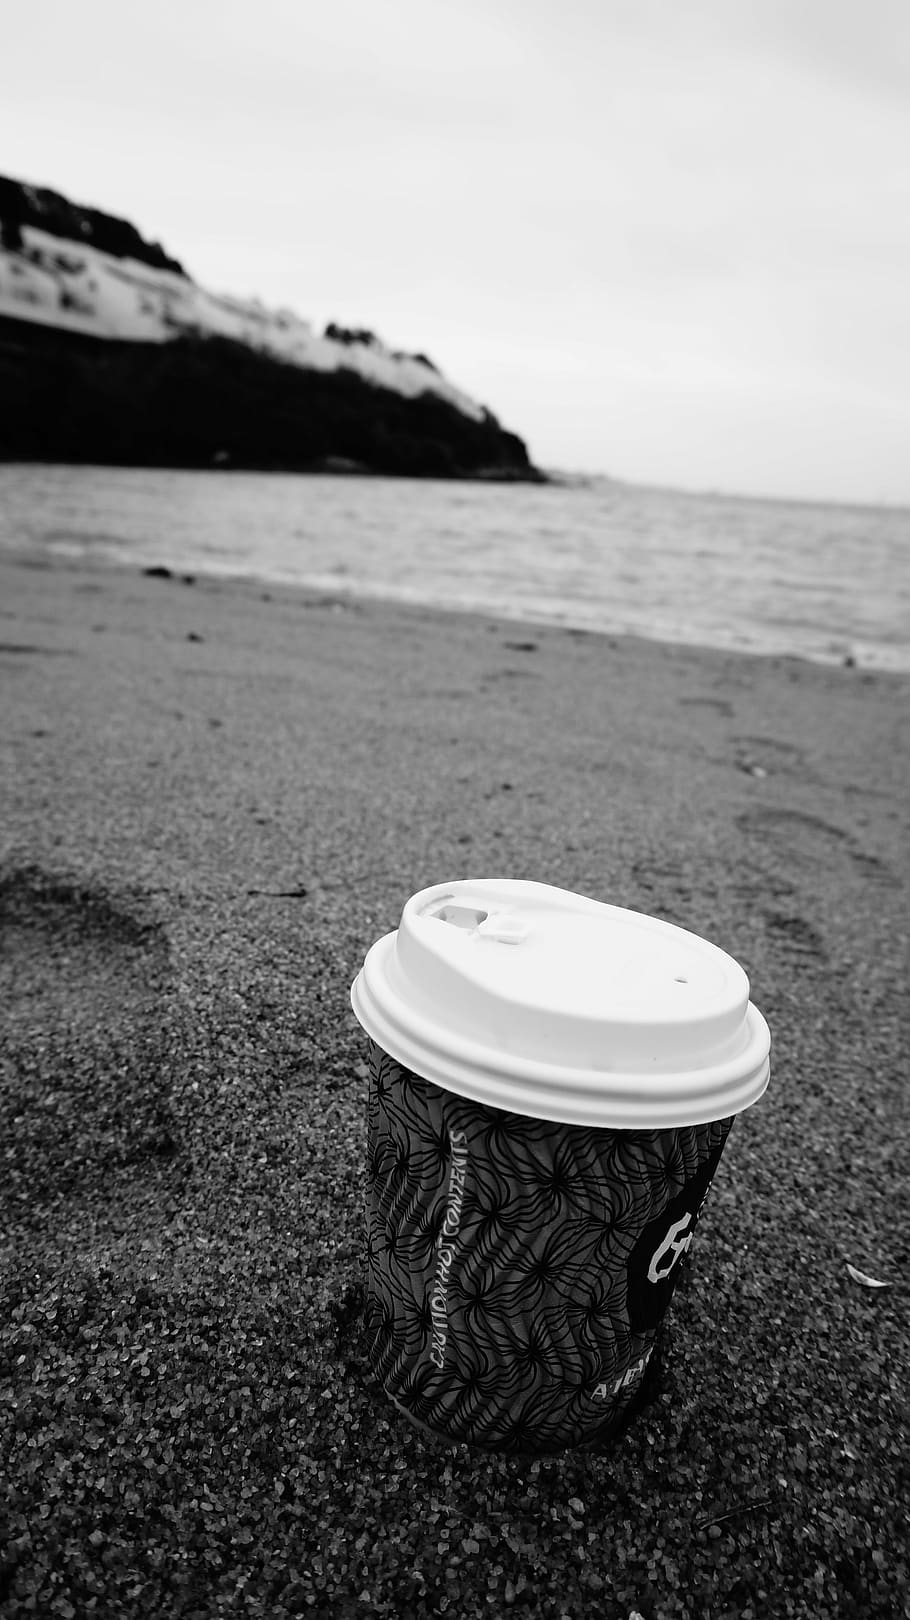 monochrome, water, sea, relaxation, beach, coffee, sand, black and white, peaceful, land